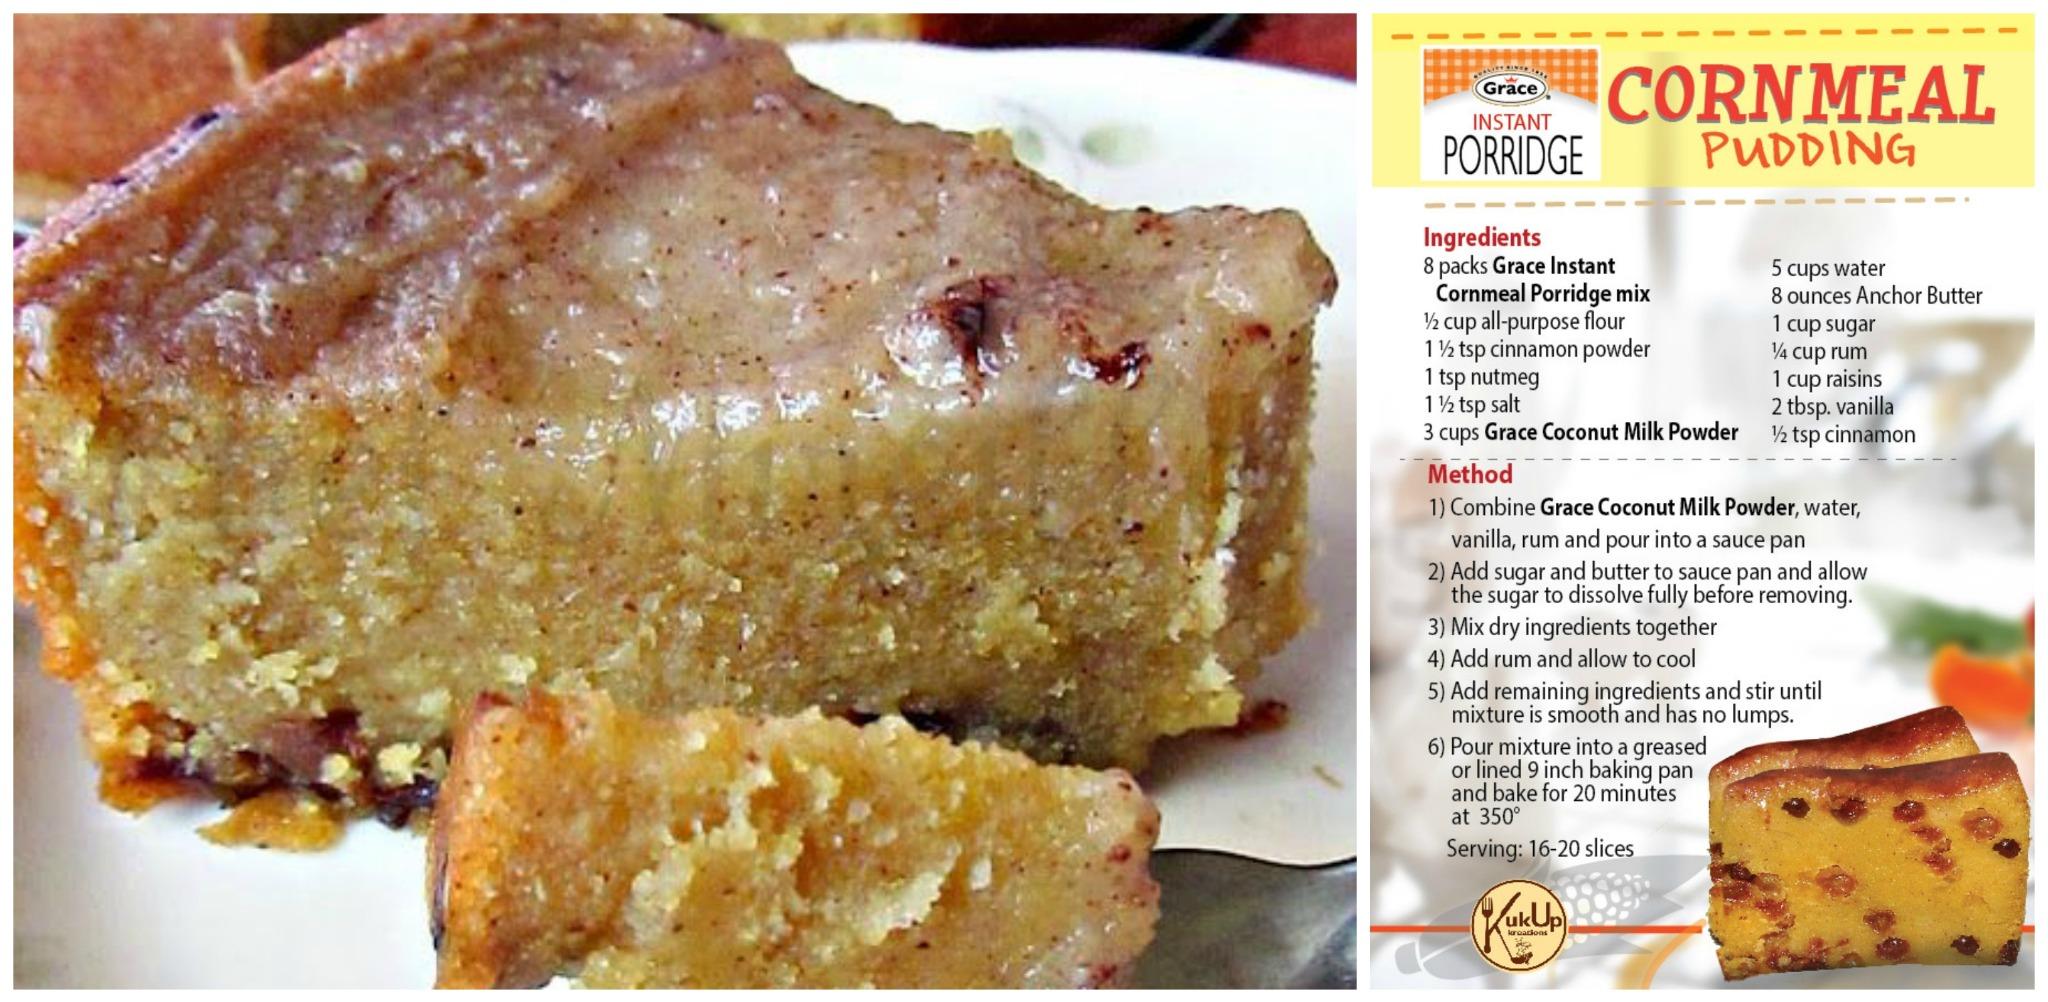 Grace Foods on Twitter "It's Cornmeal Pudding with our Instant